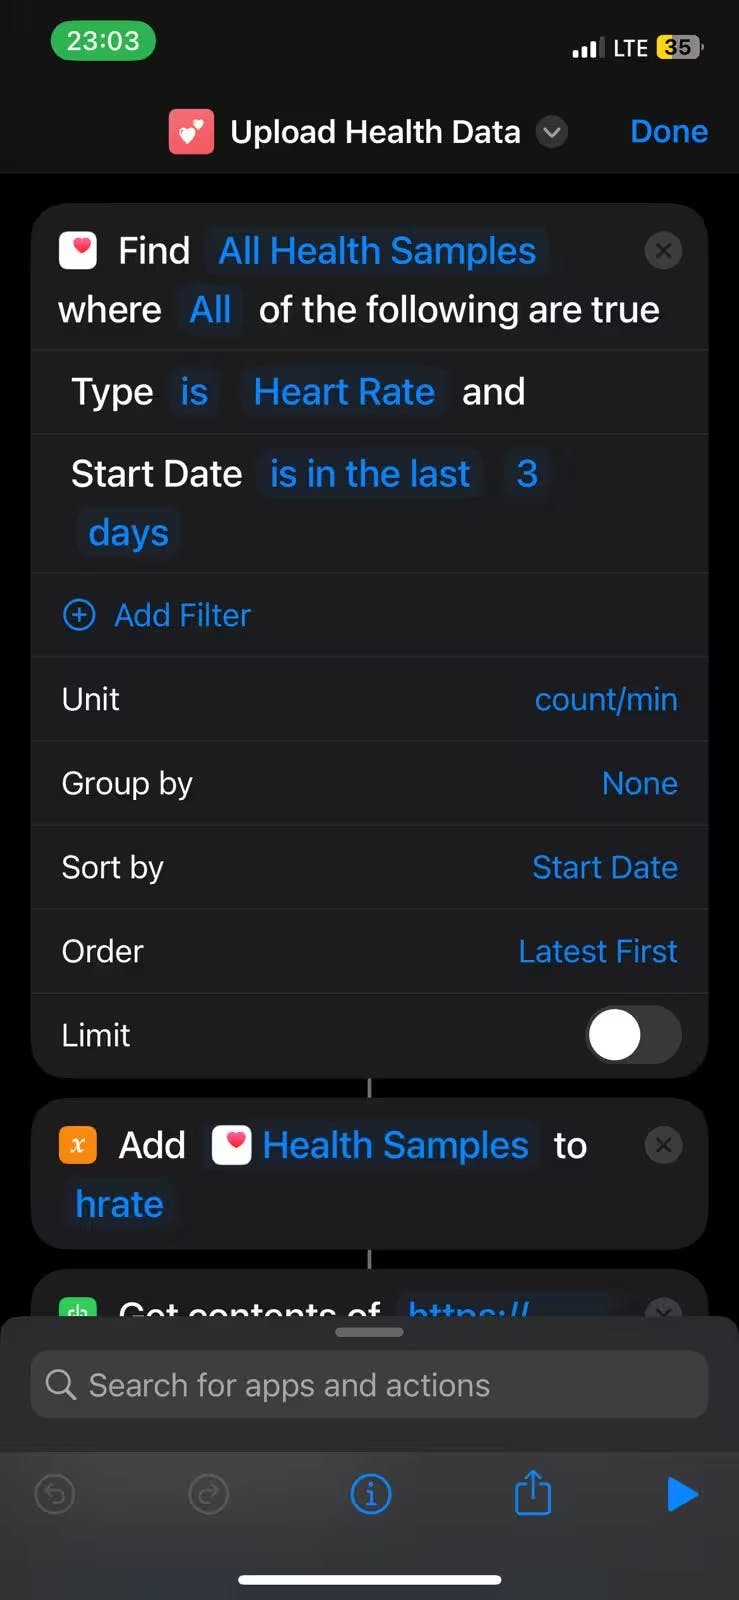 Accesing the health data inside the shortcut.